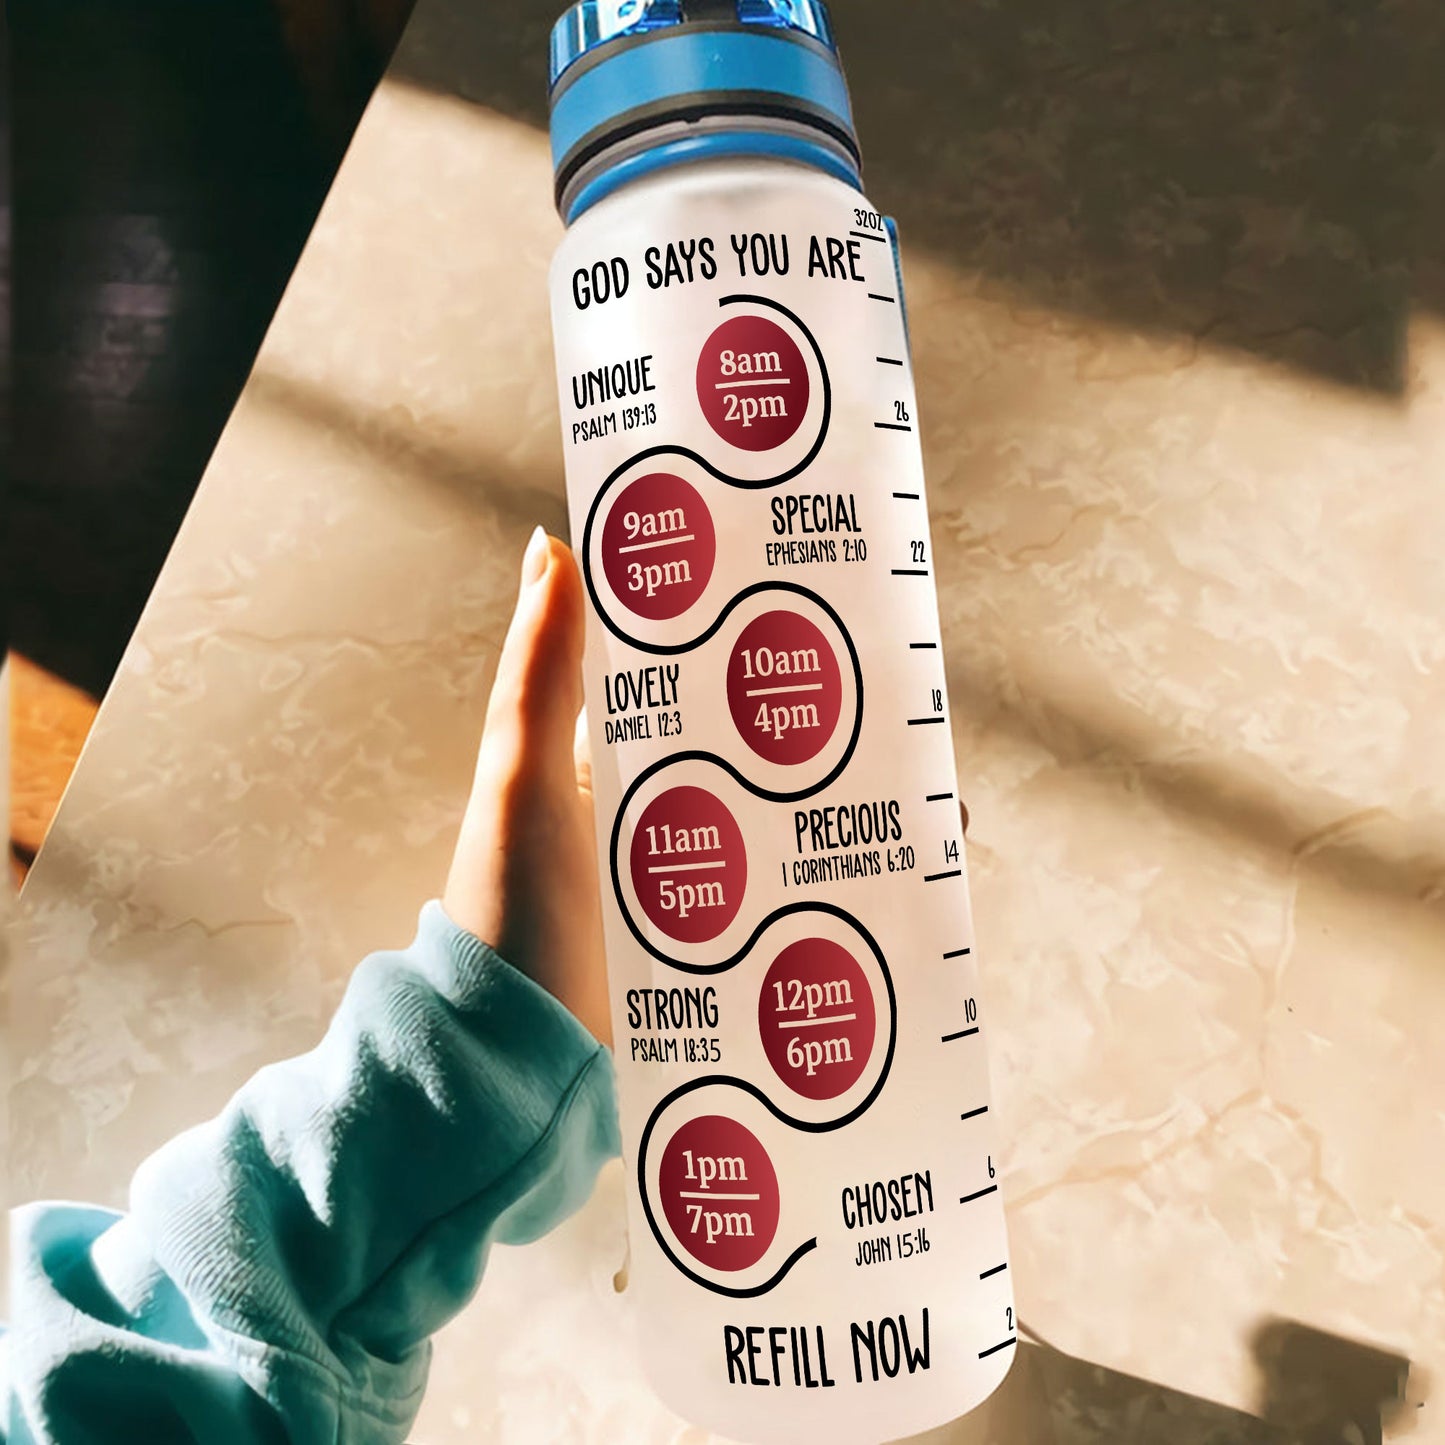 Stop Slacking Girl! Drink Your Water New Version - Personalized Tracker Bottle